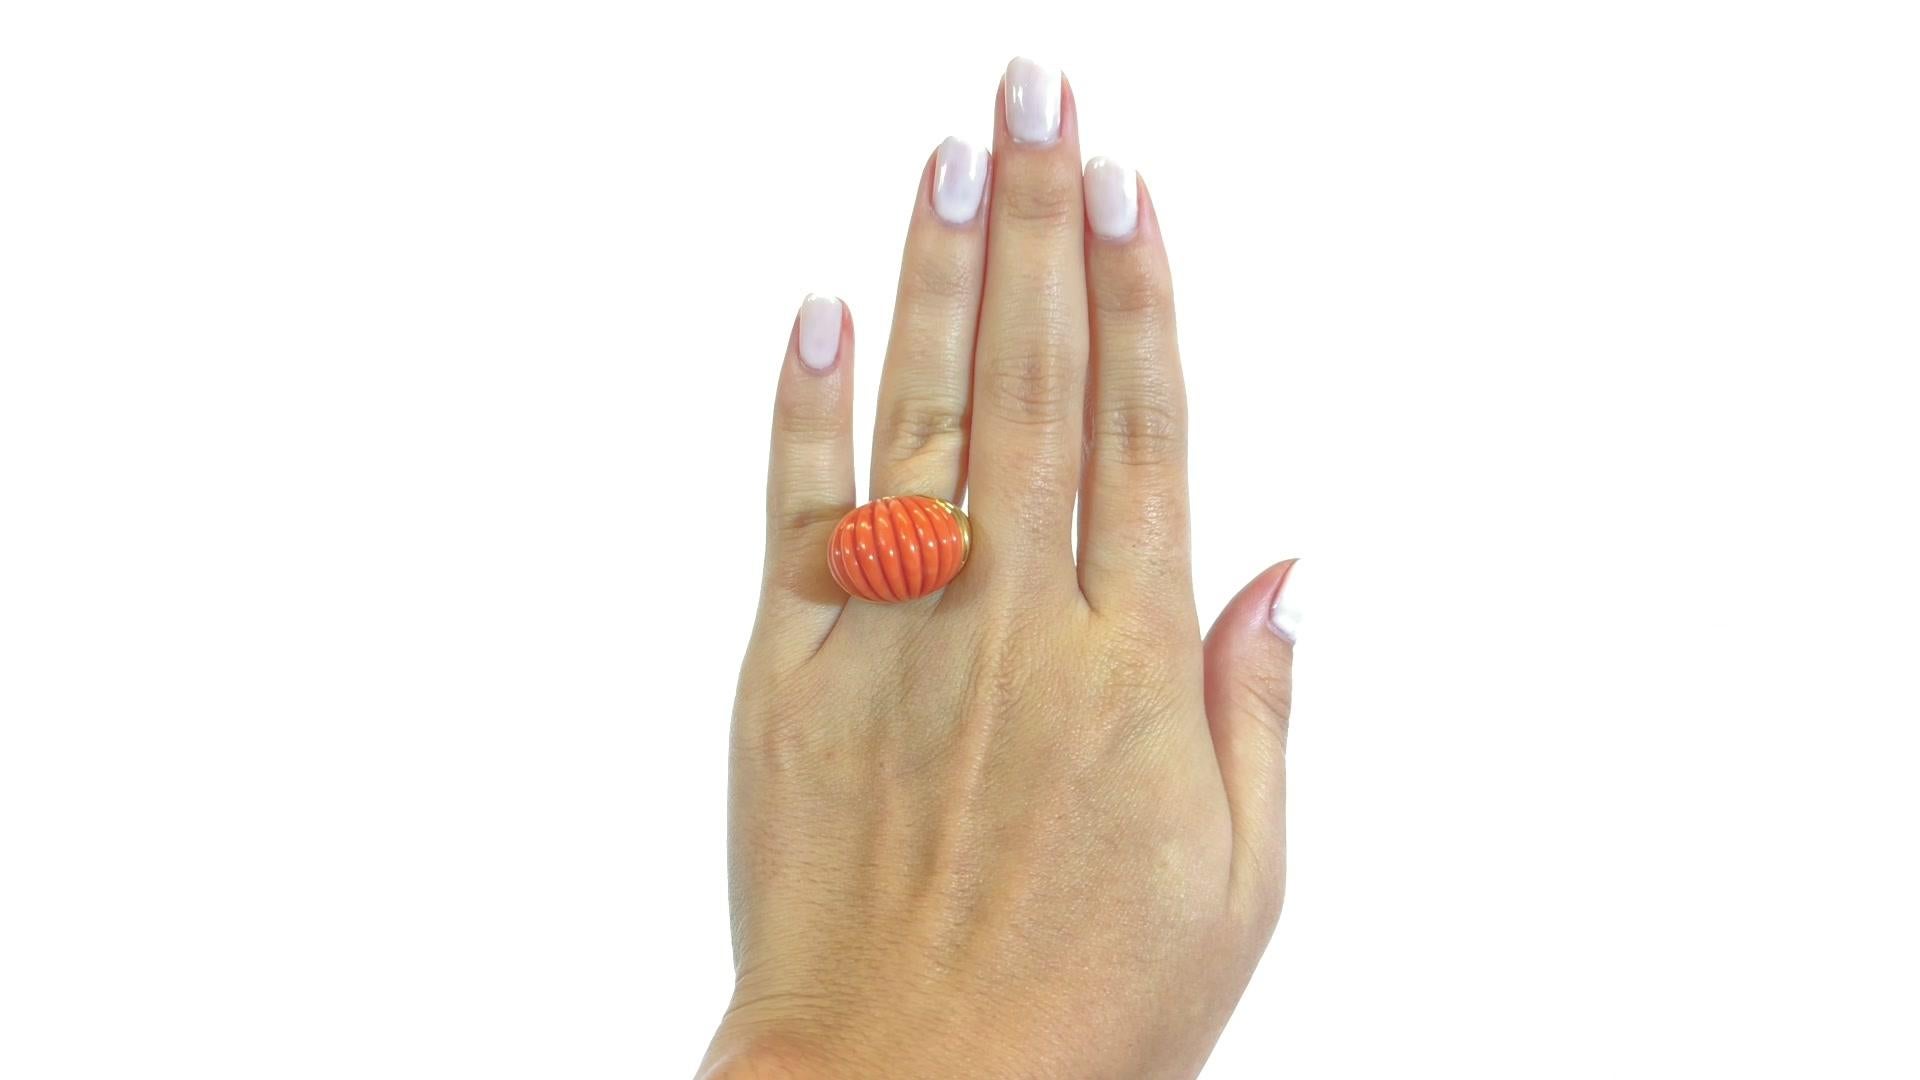 Coral rings always attract the eye due to their vibrant color. Extravagant and glamorous! Wear it for cocktail hour or a lavish evening event. The ring will add a nice eye-catching accent to your look. Carved Coral 18k Gold Dome Ring. Stamped 18k.